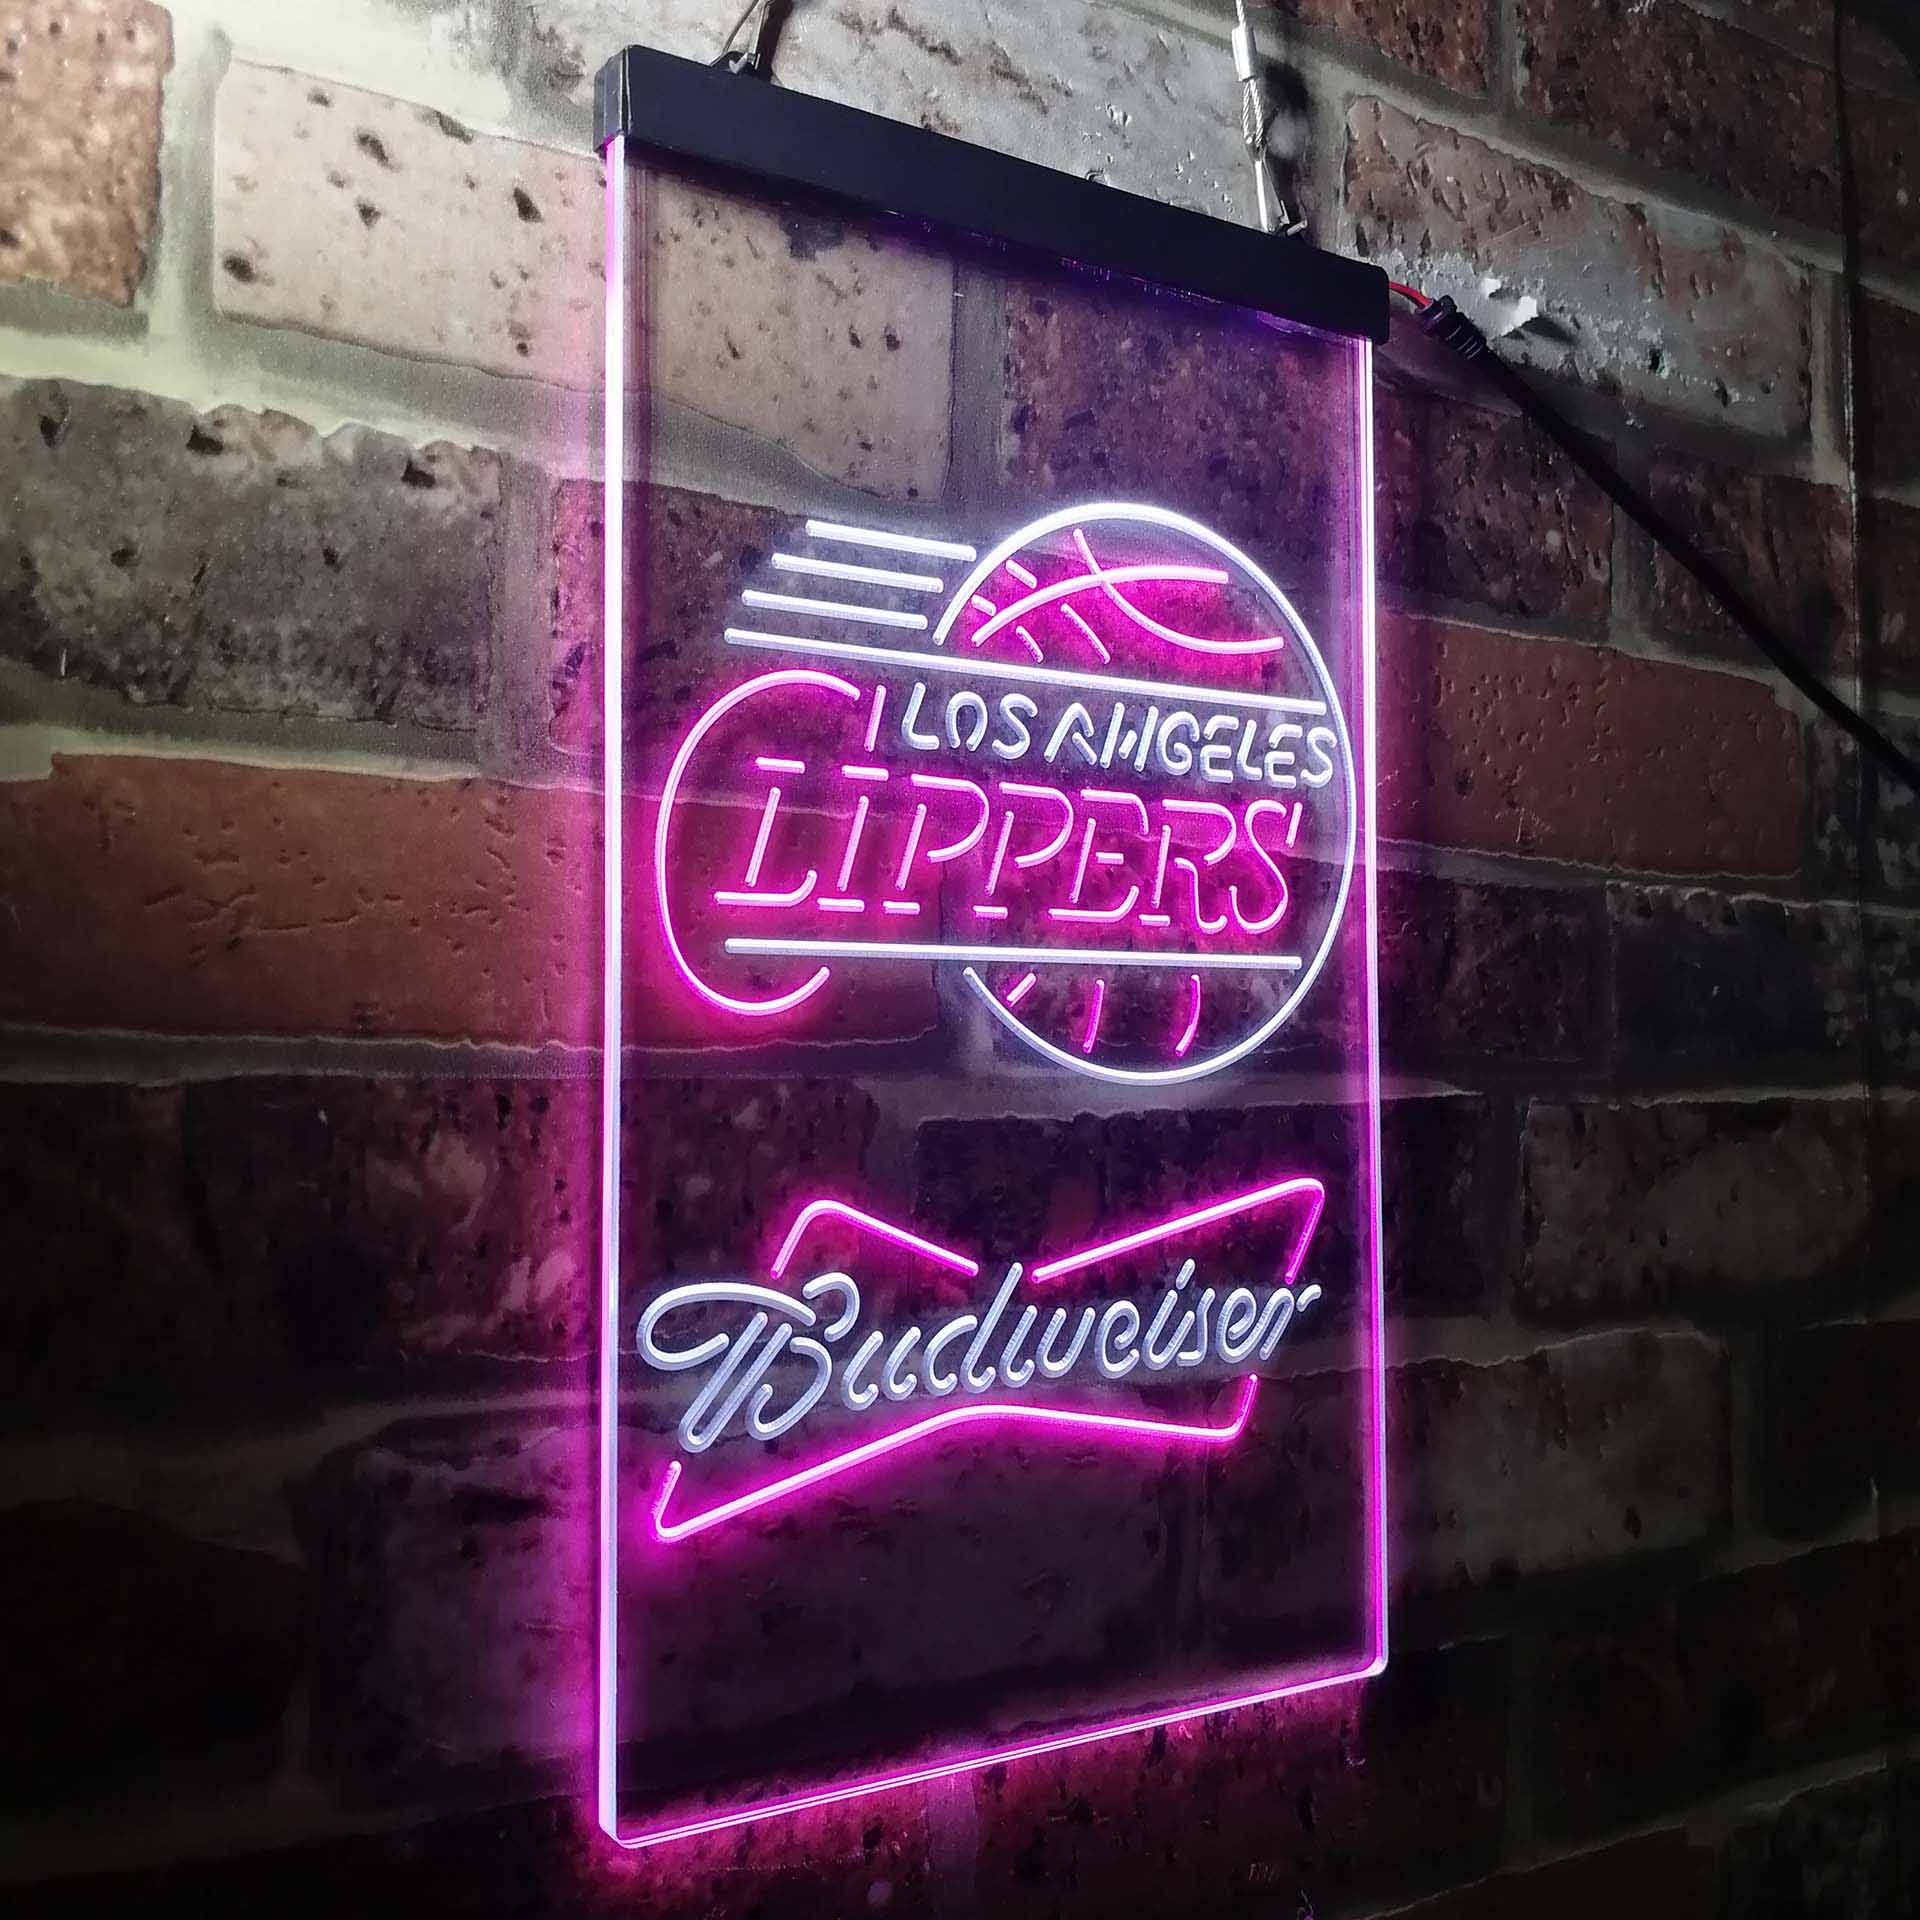 Angeles Clippers Budweiser  LED Neon Sign